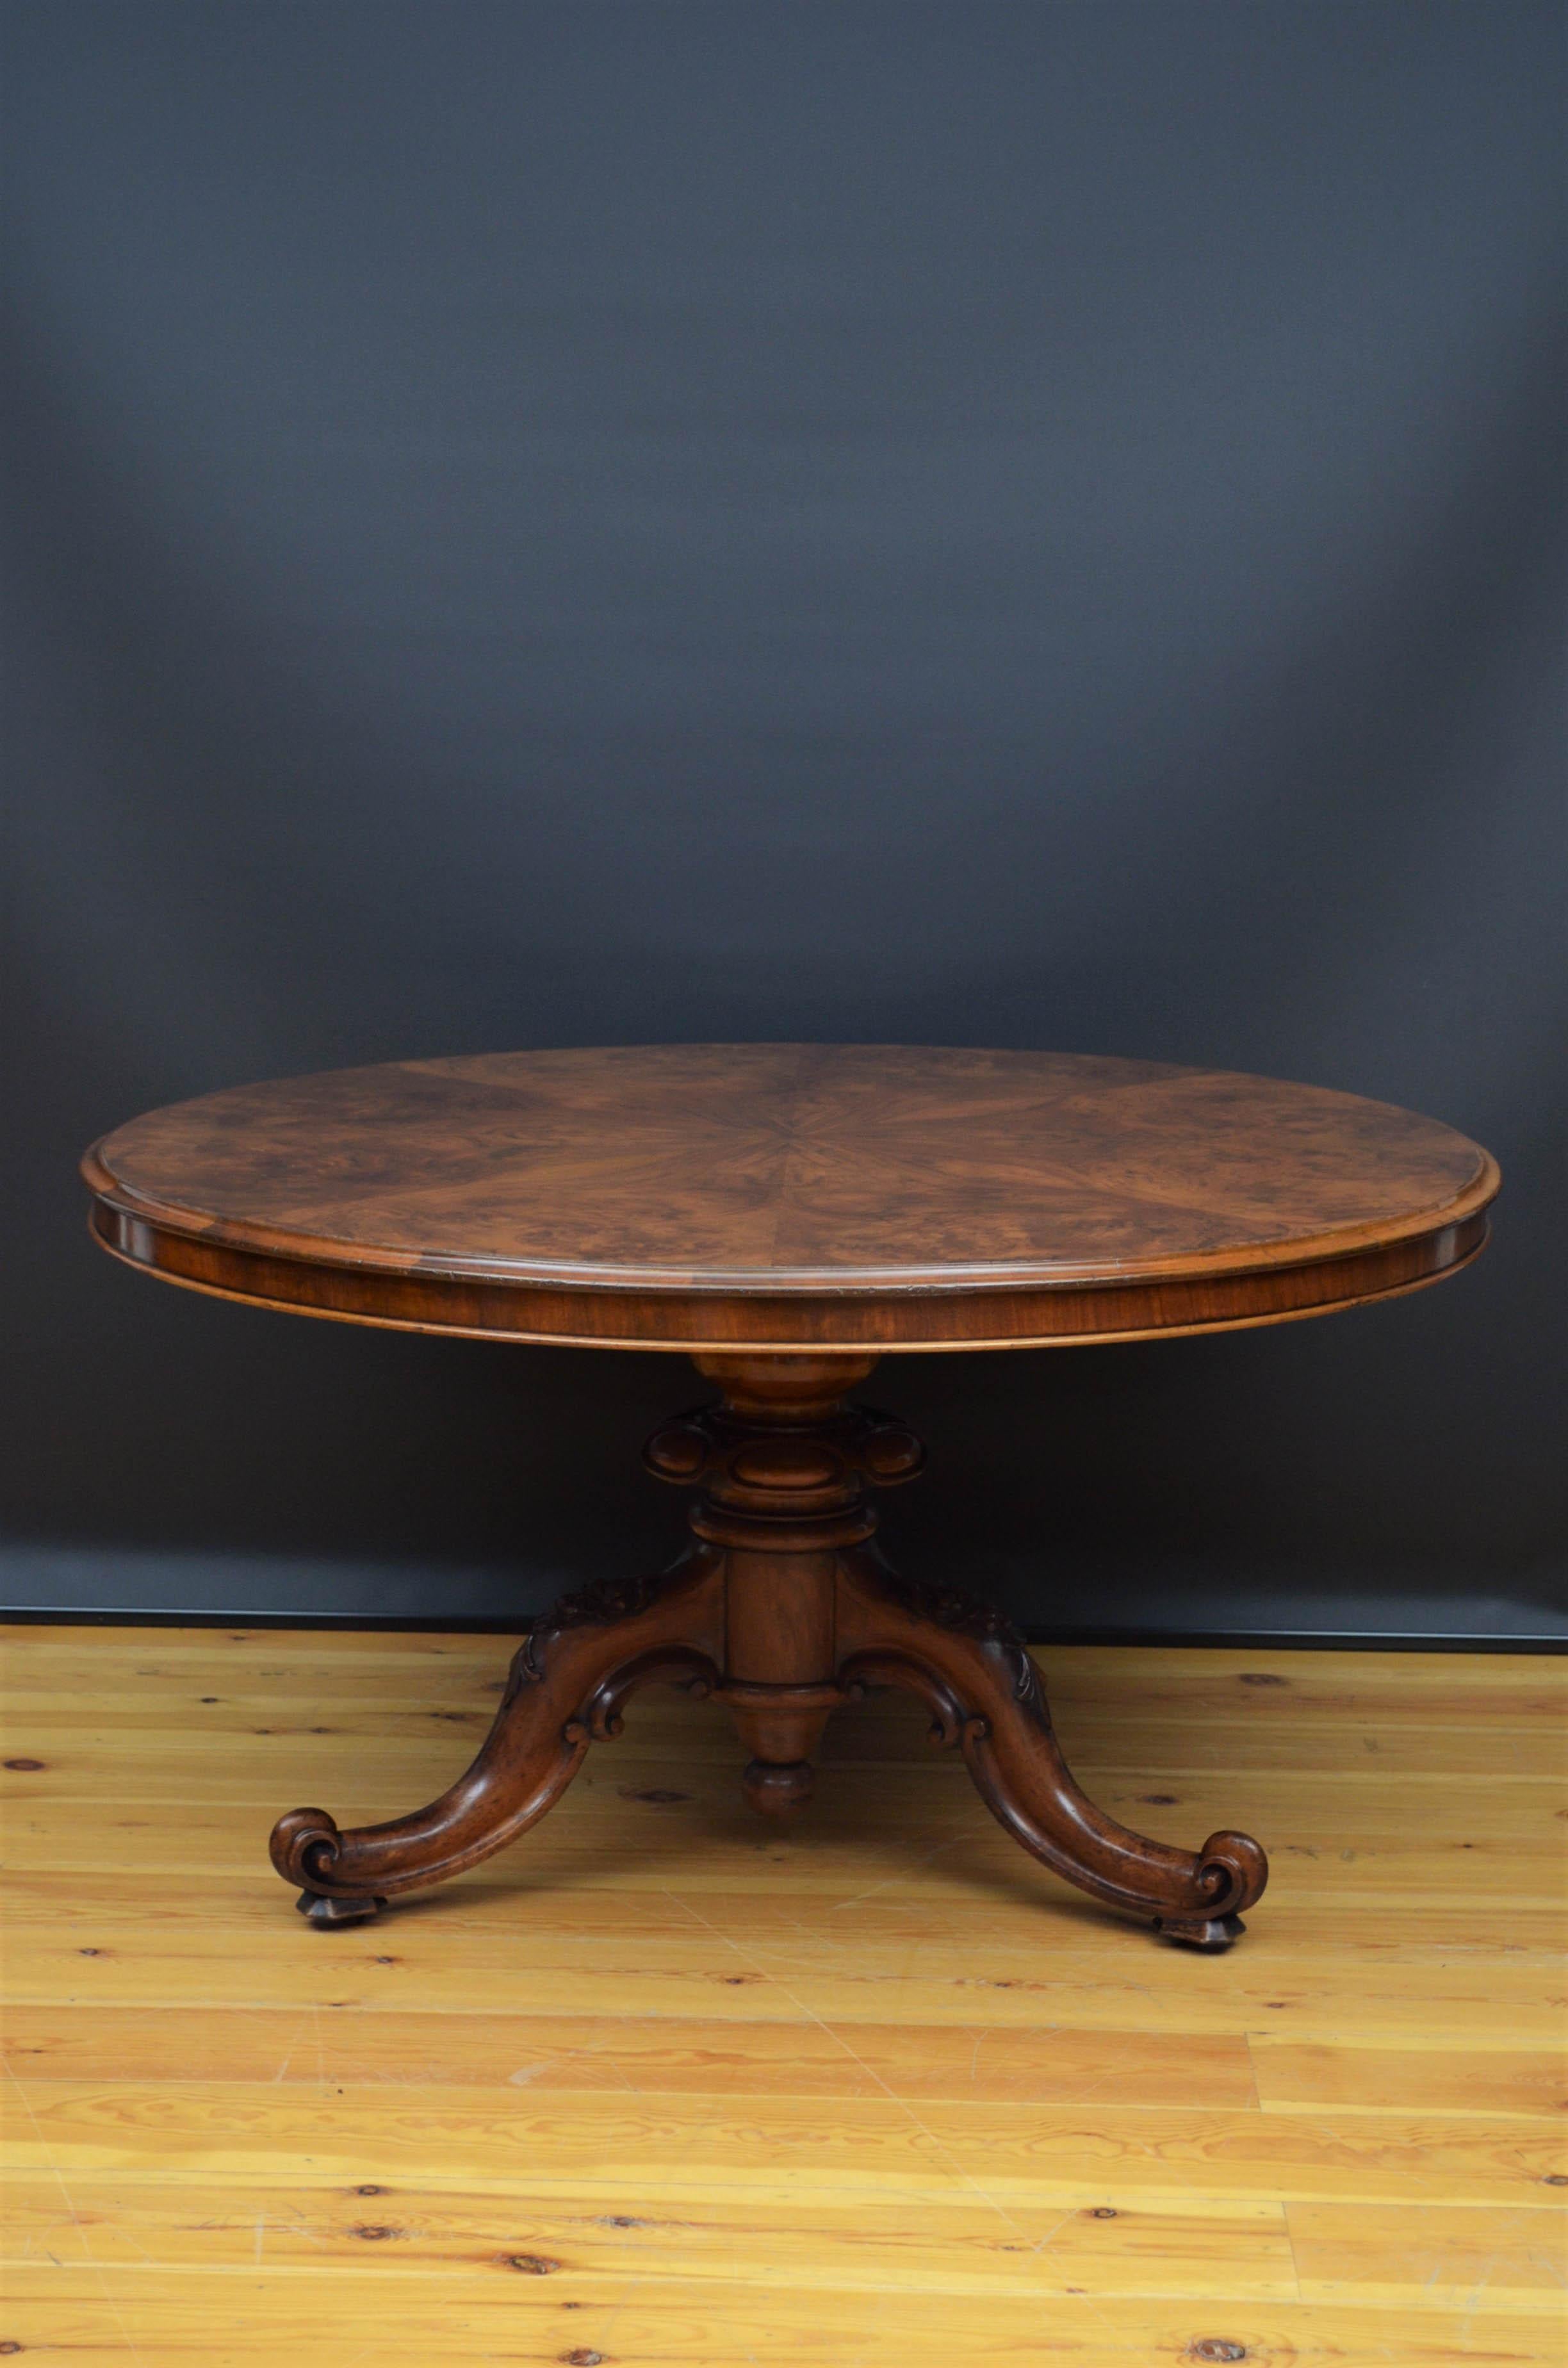 Sn5110 Superb large Victorian tilt top table, having figured walnut to with outstanding grain and moulded edge, standing on substantial turned column terminating in three carved floral carved legs and brass castors. This antique table has been